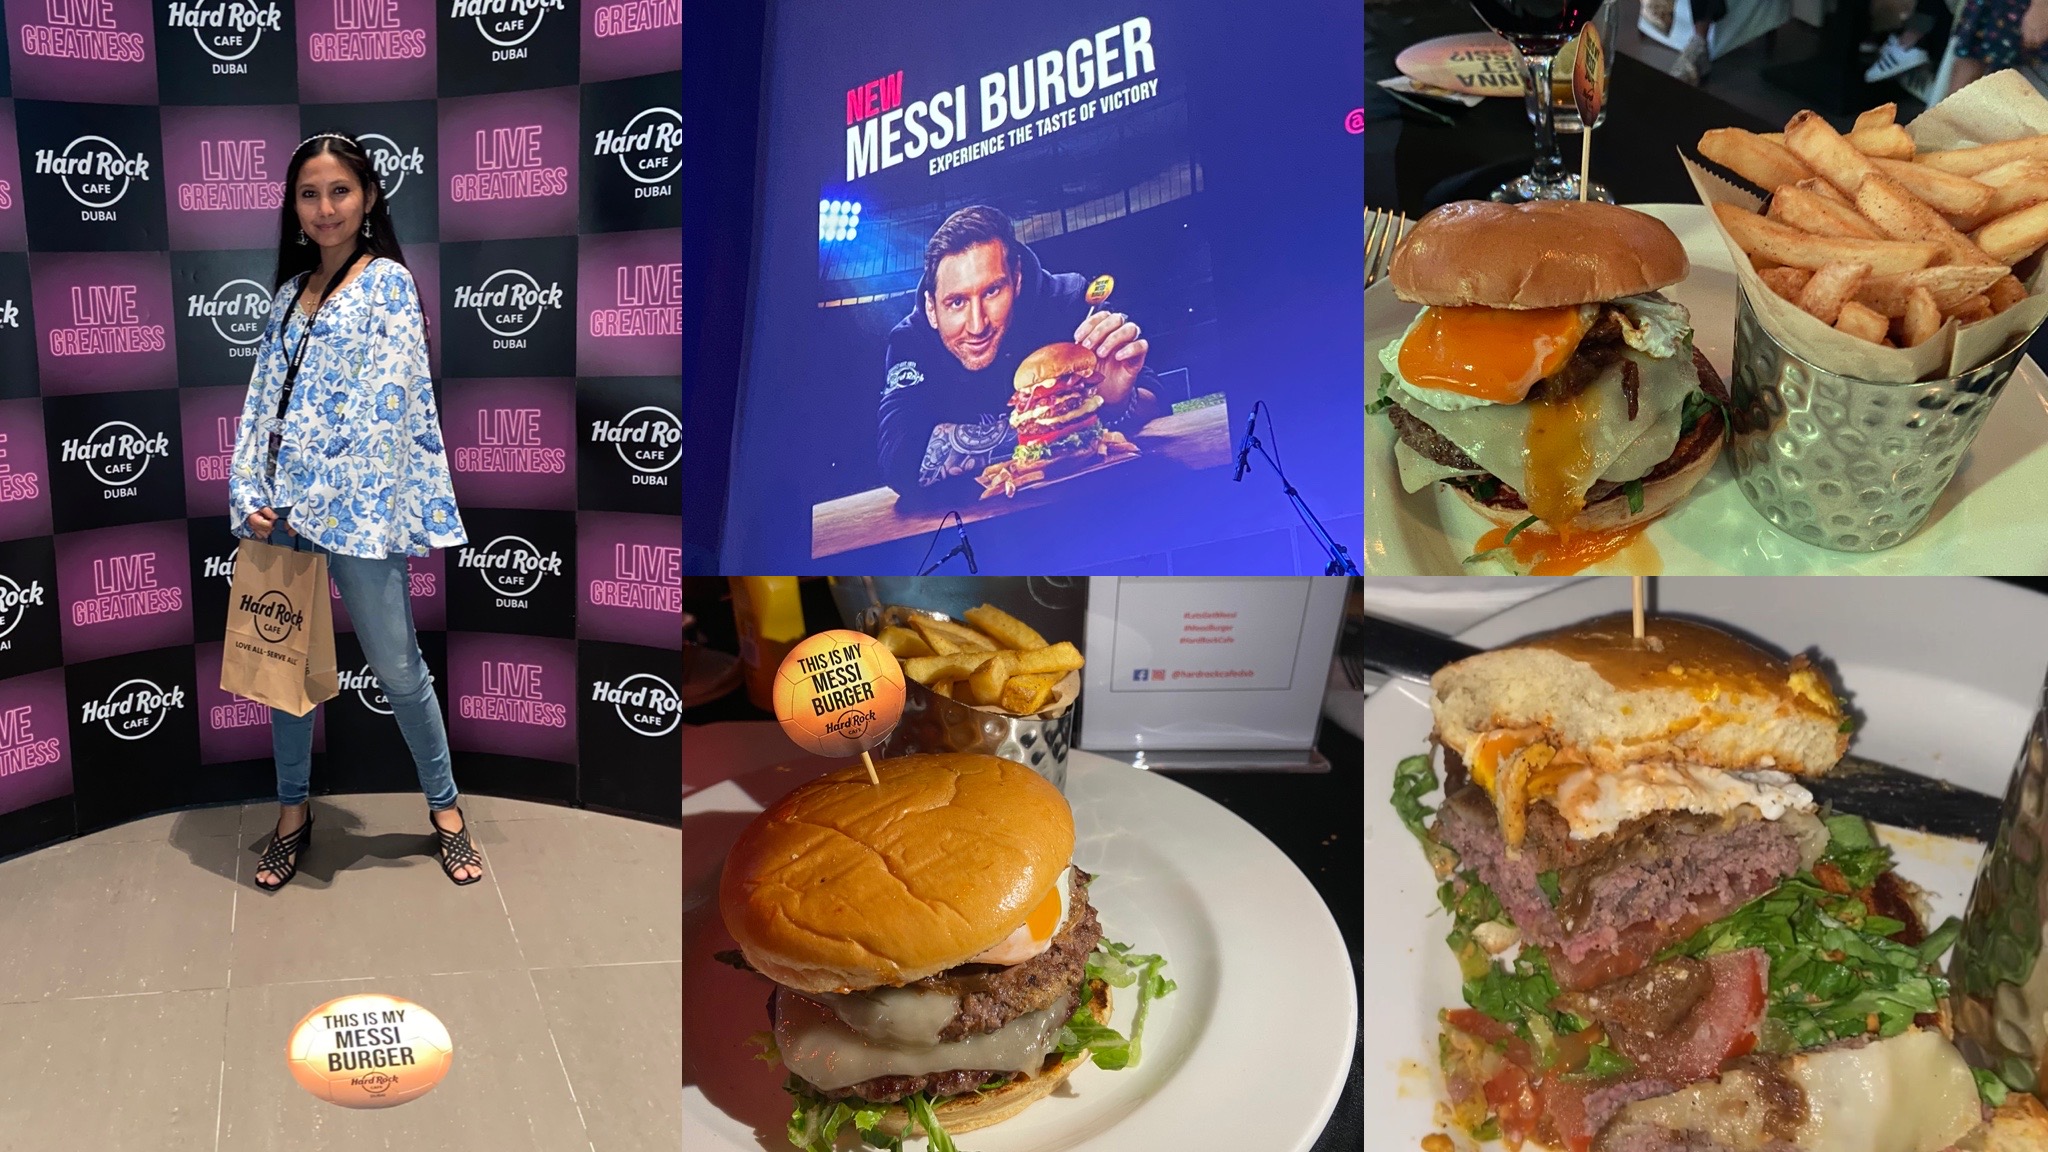 Hard Rock Cafe Launches Its Newest Burger Inspired by Brand